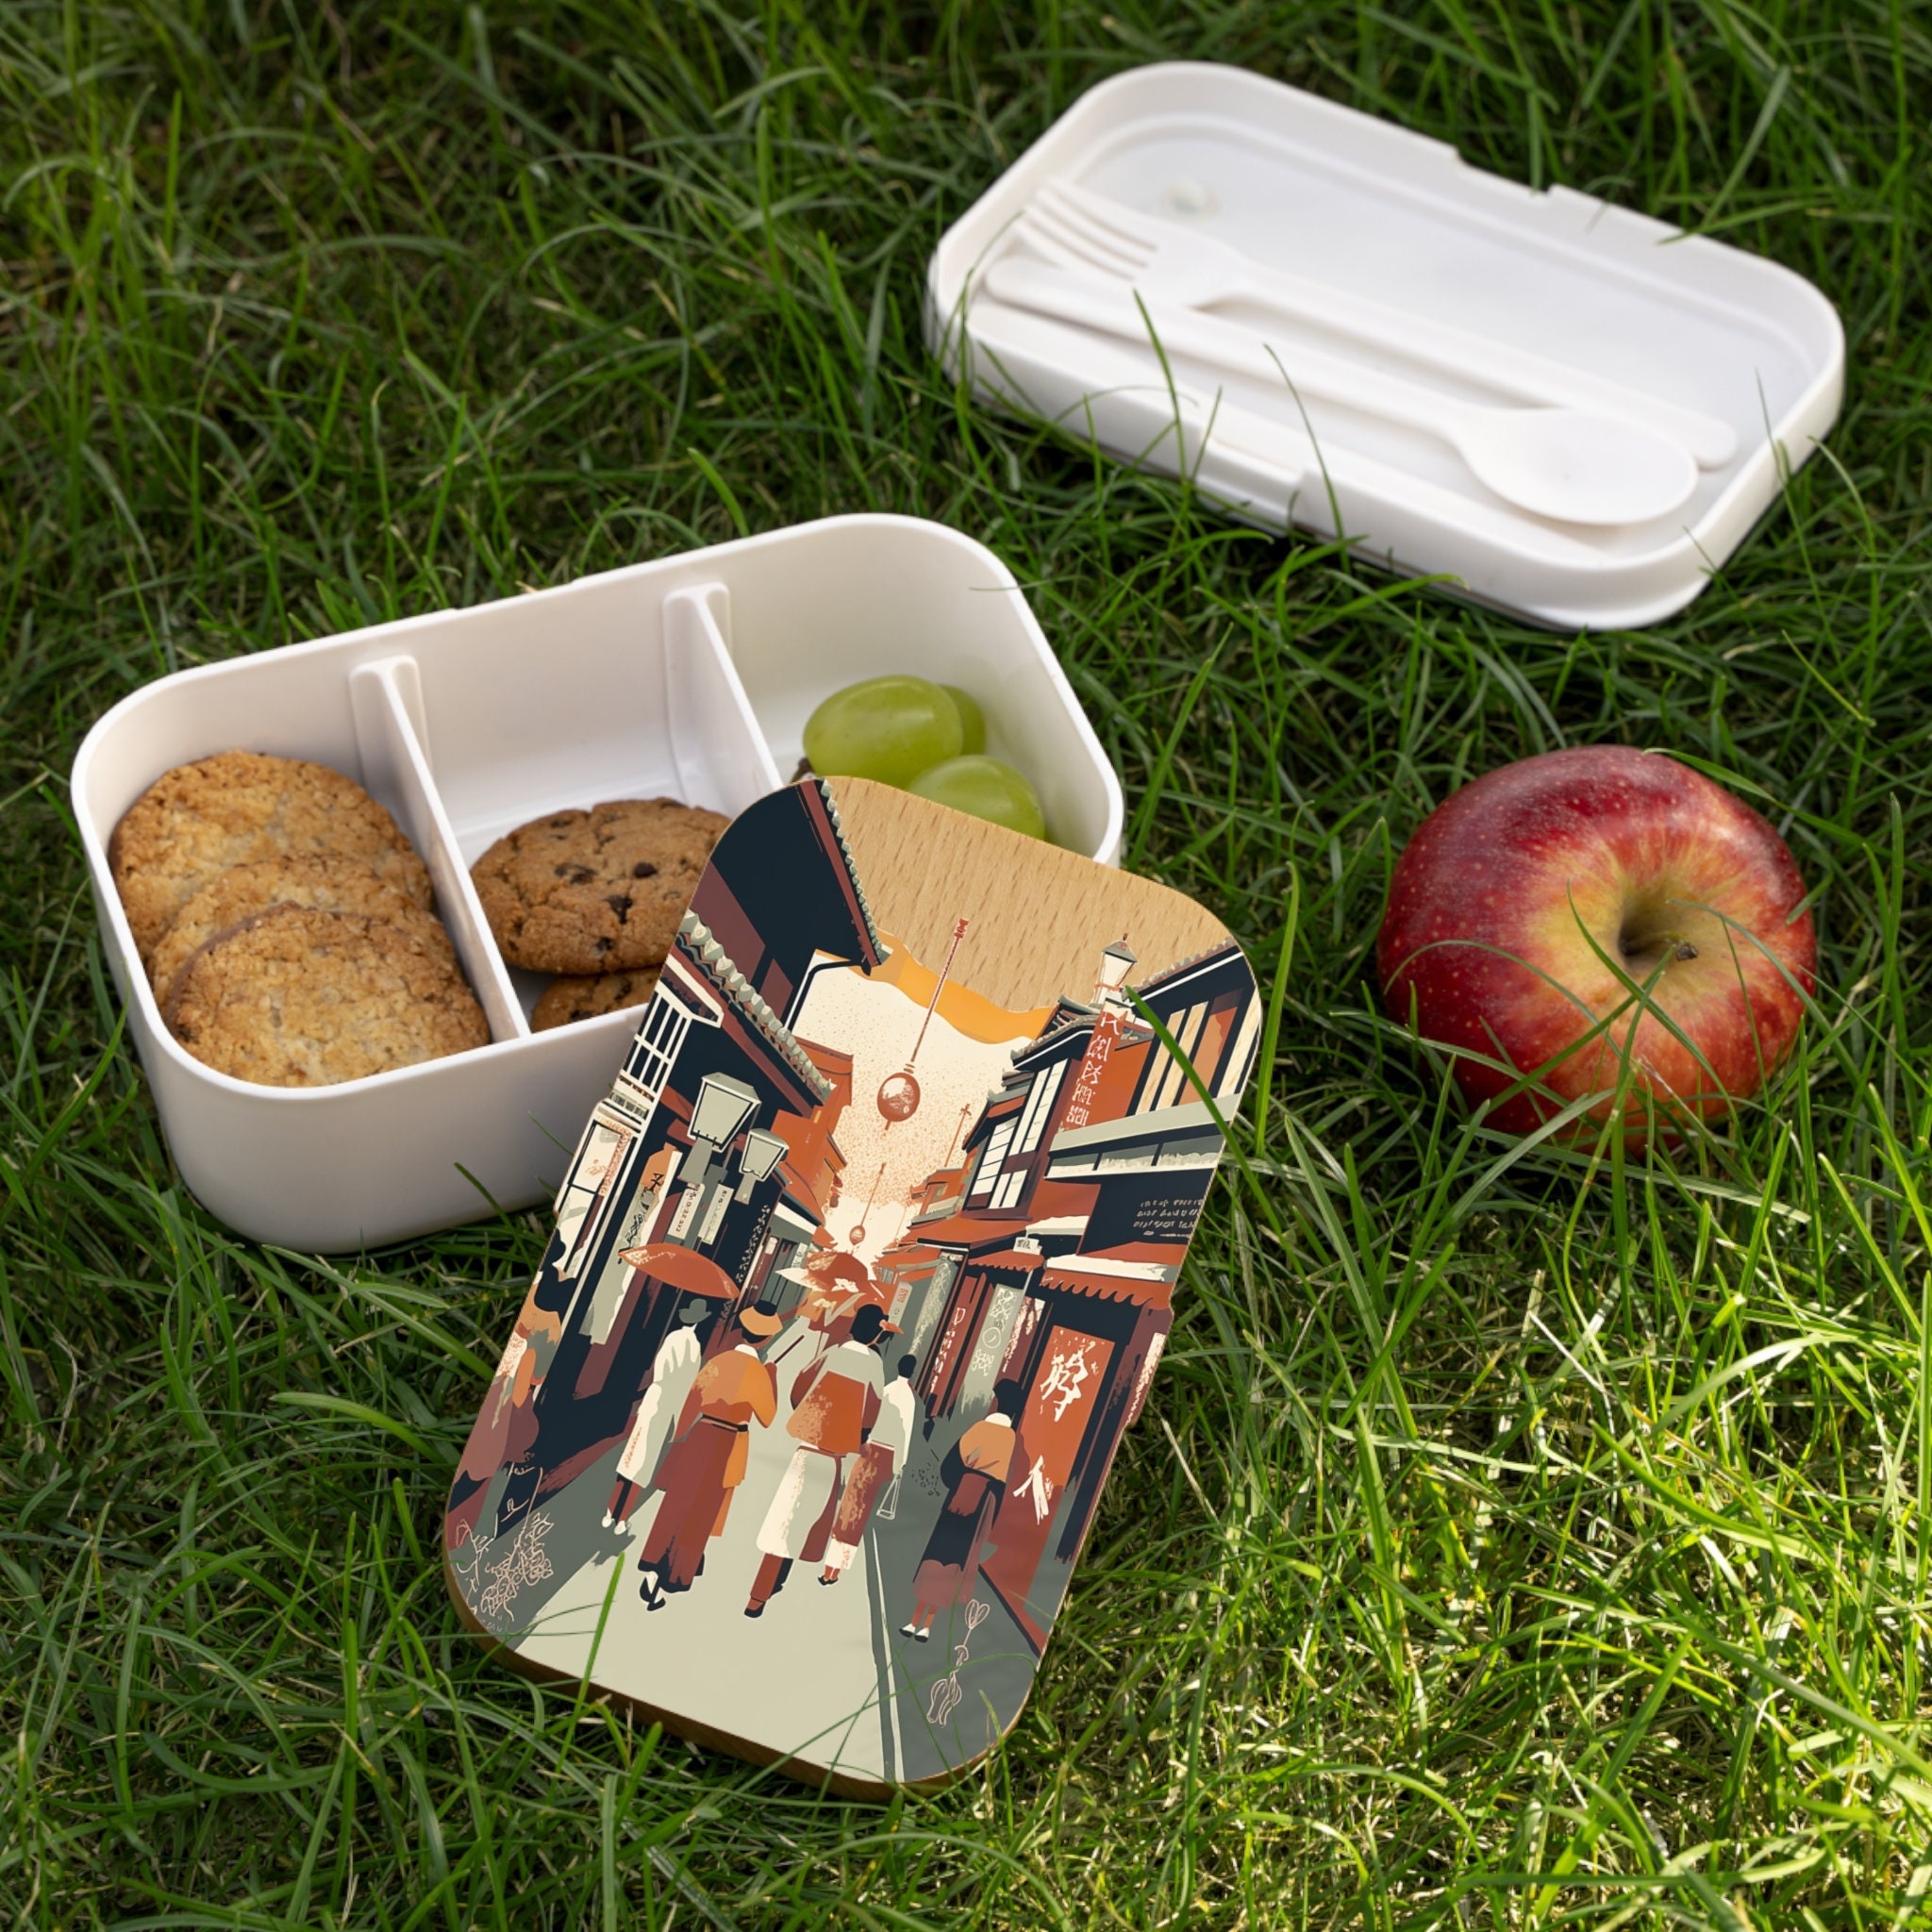 Bento Box Adult Lunch Box – lookingGLASS Lifestyle